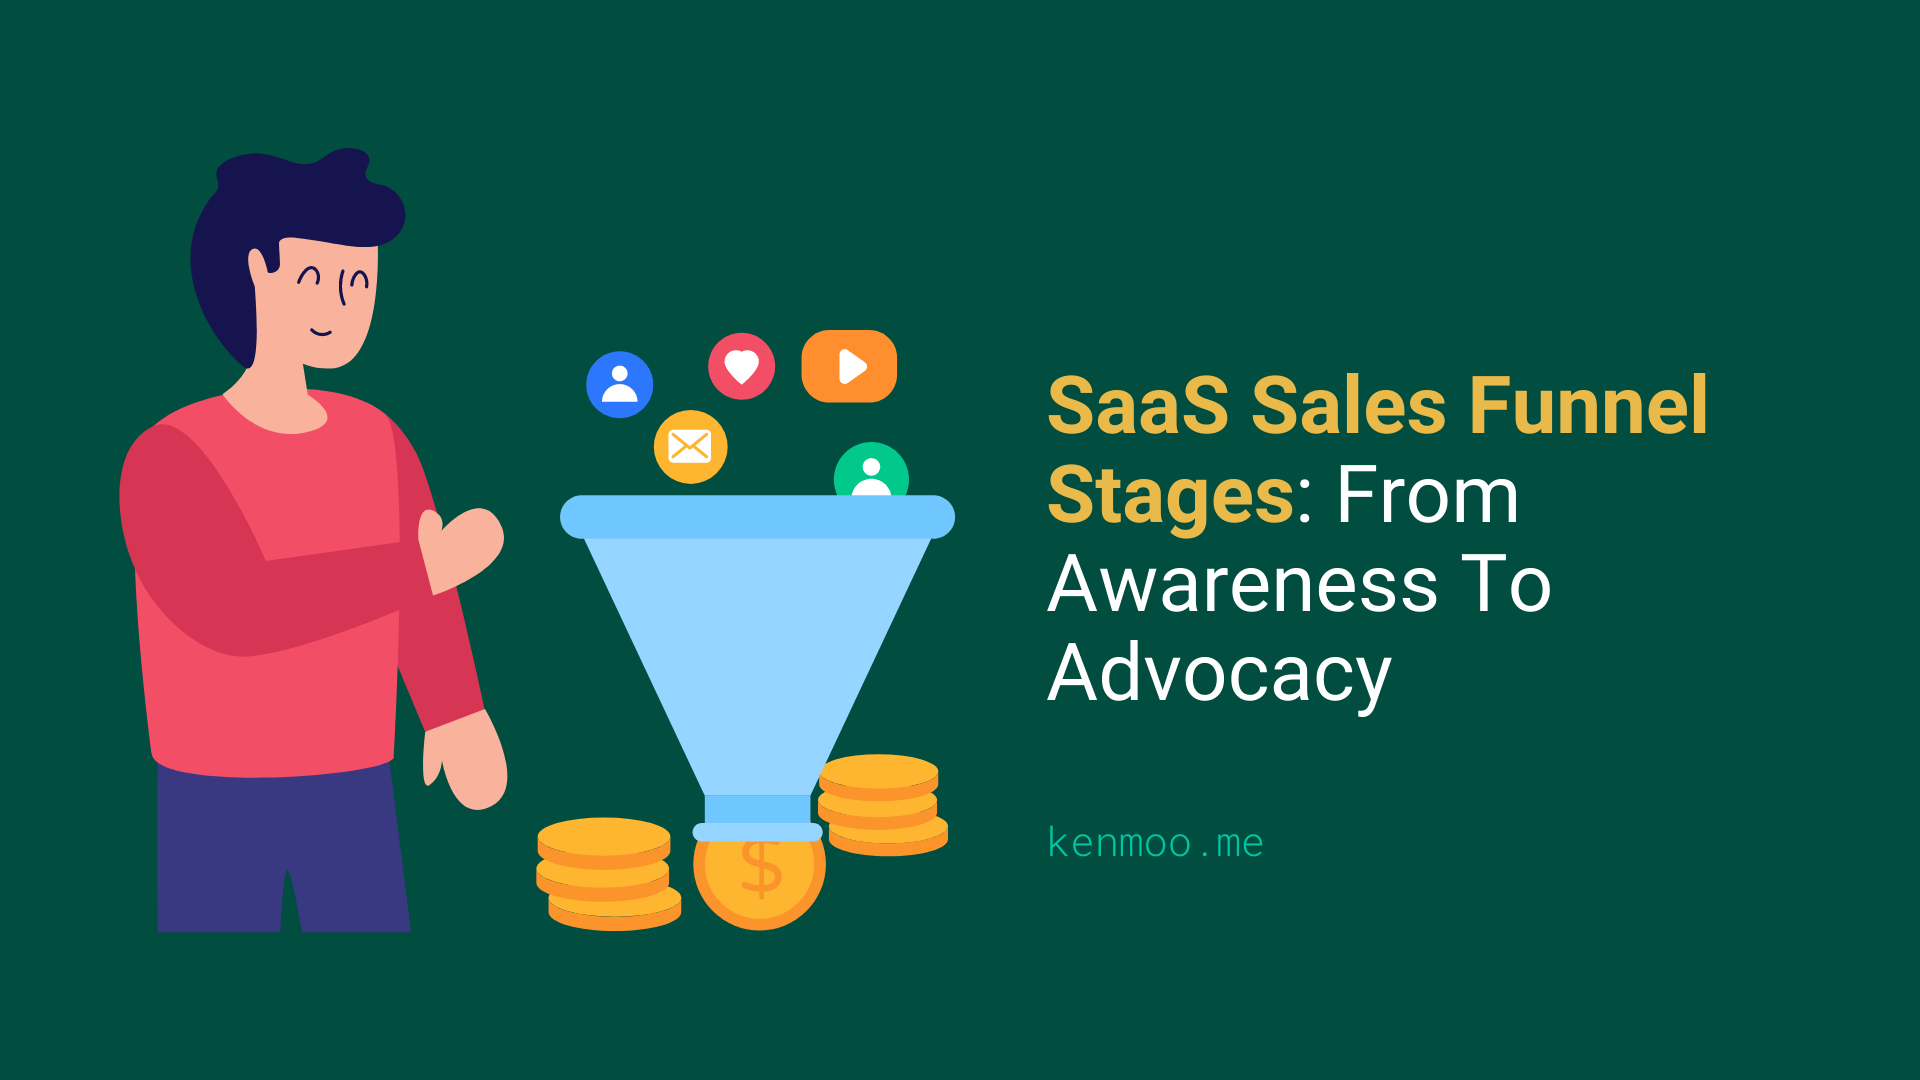 SaaS Sales Funnel Stages: From Awareness To Advocacy